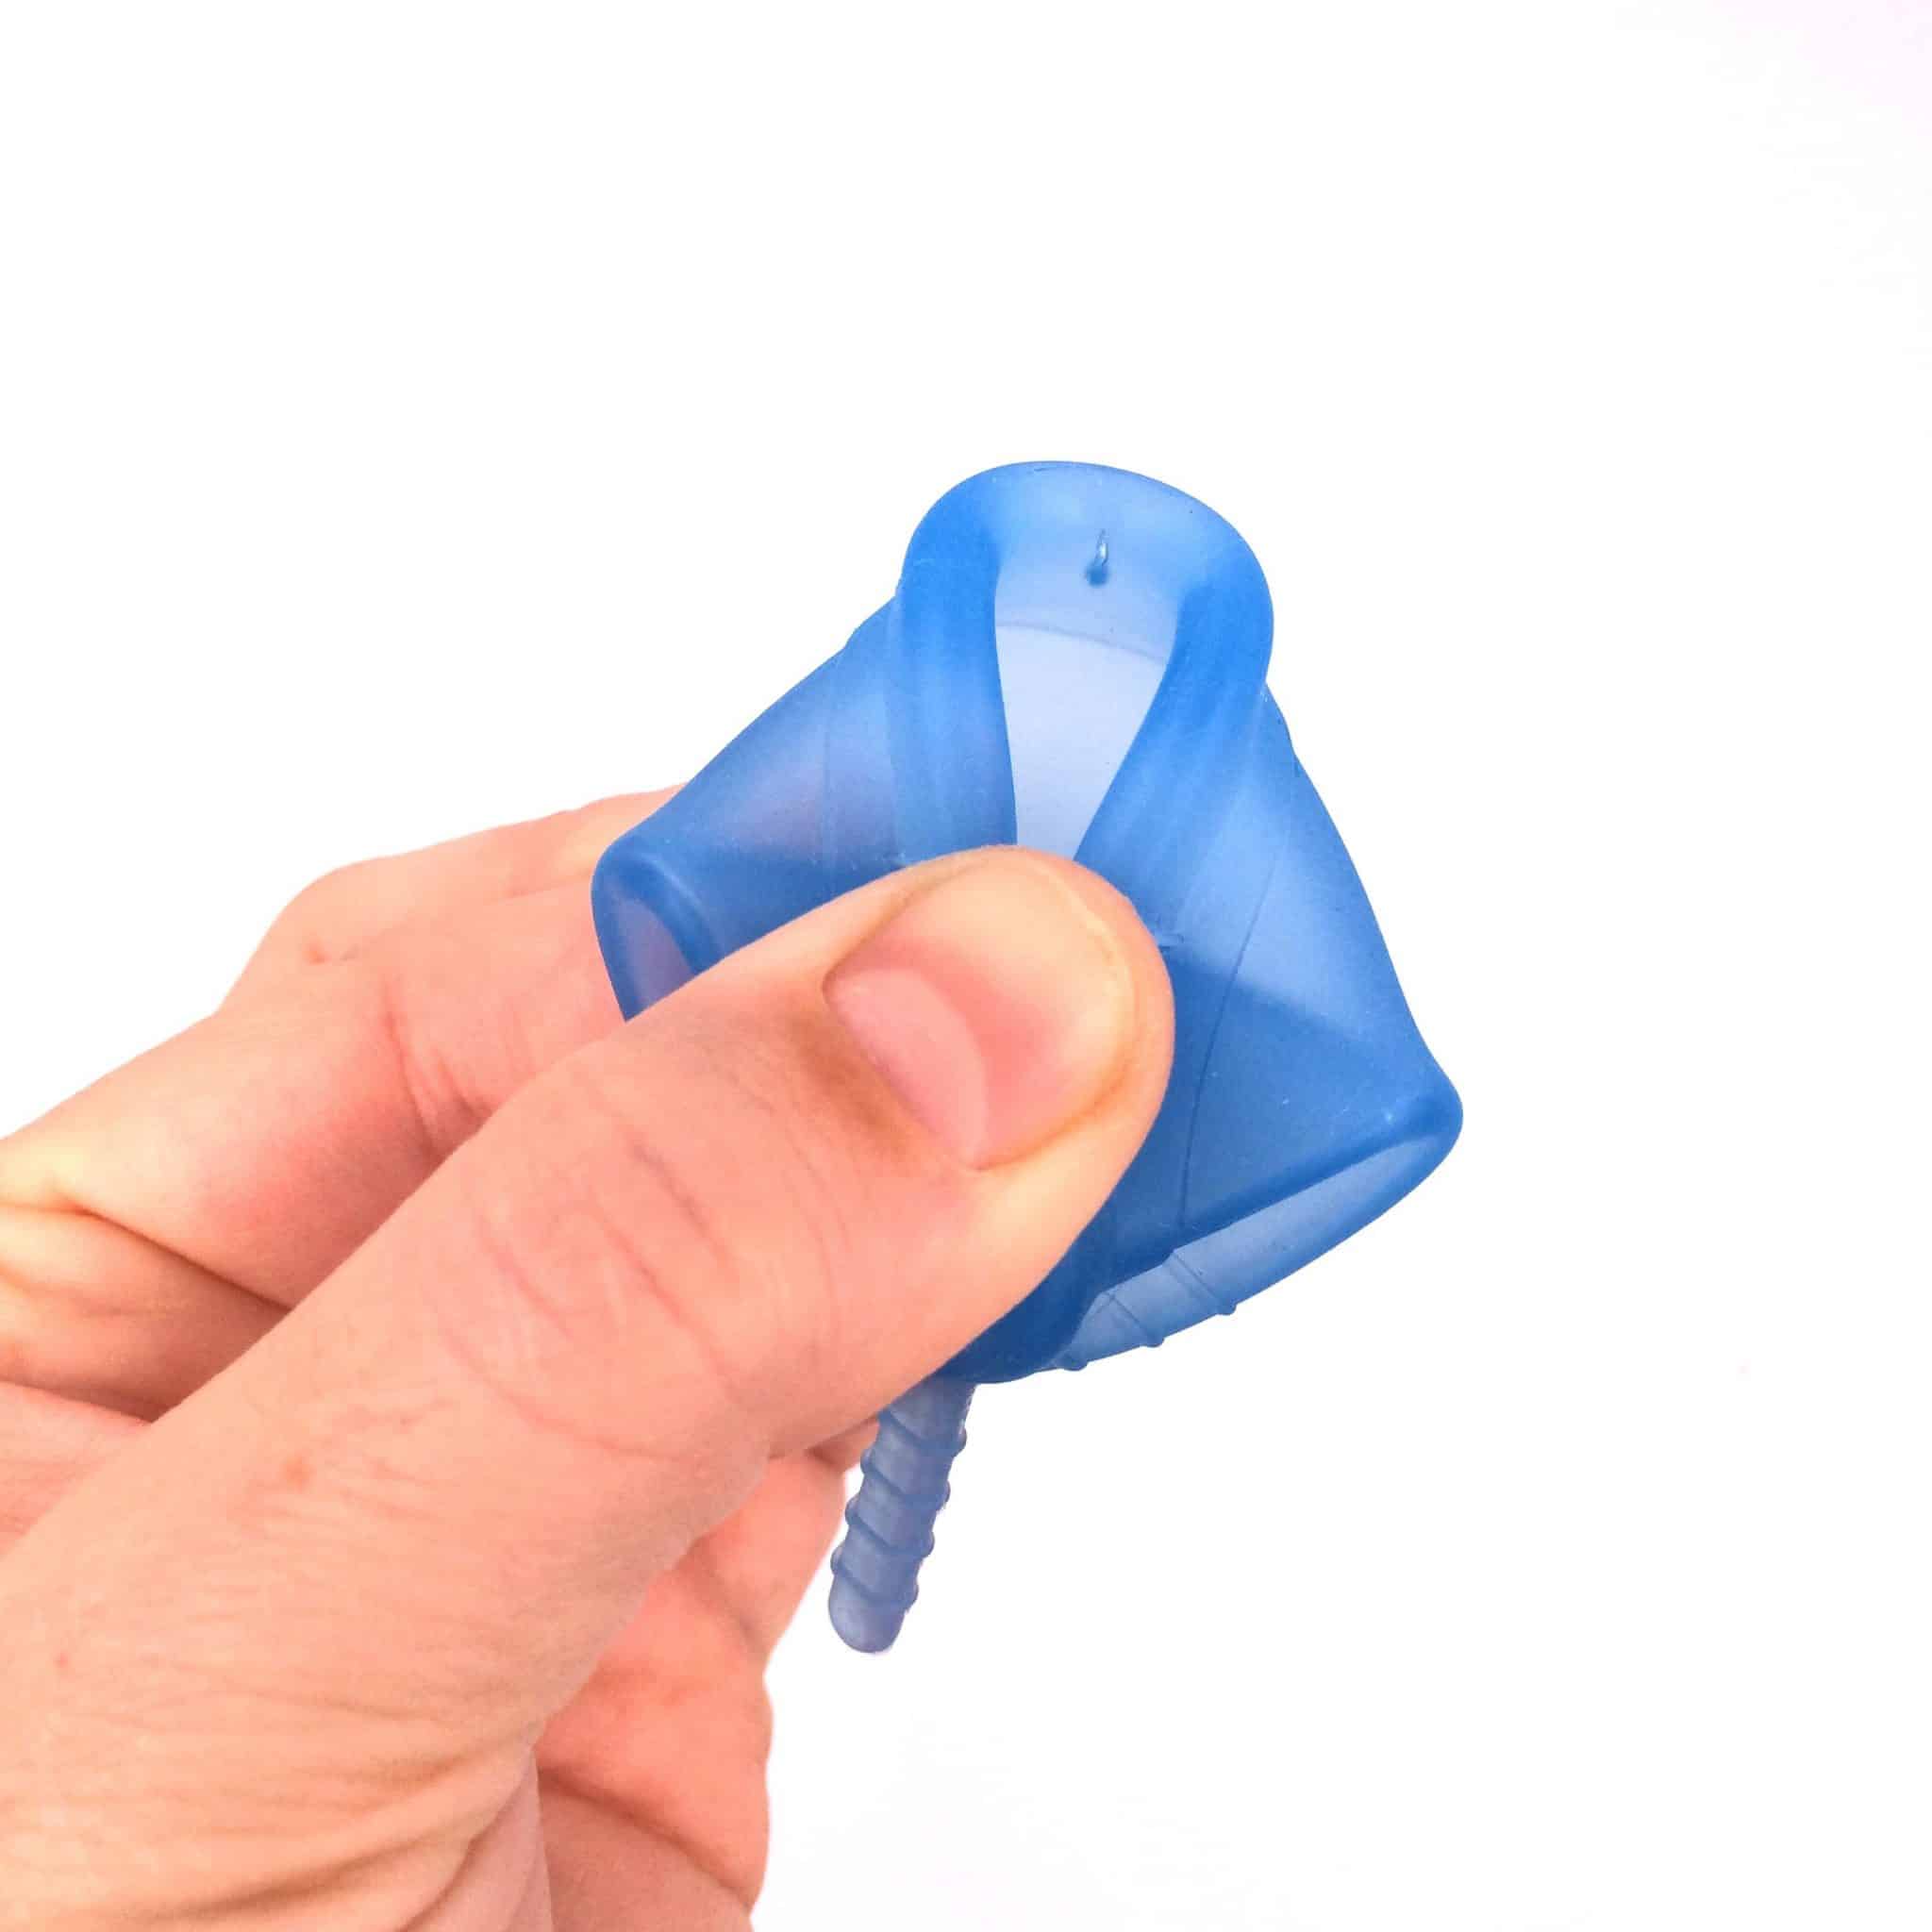 Menstrual cup folds: 15 shapes for you to choose your favorite